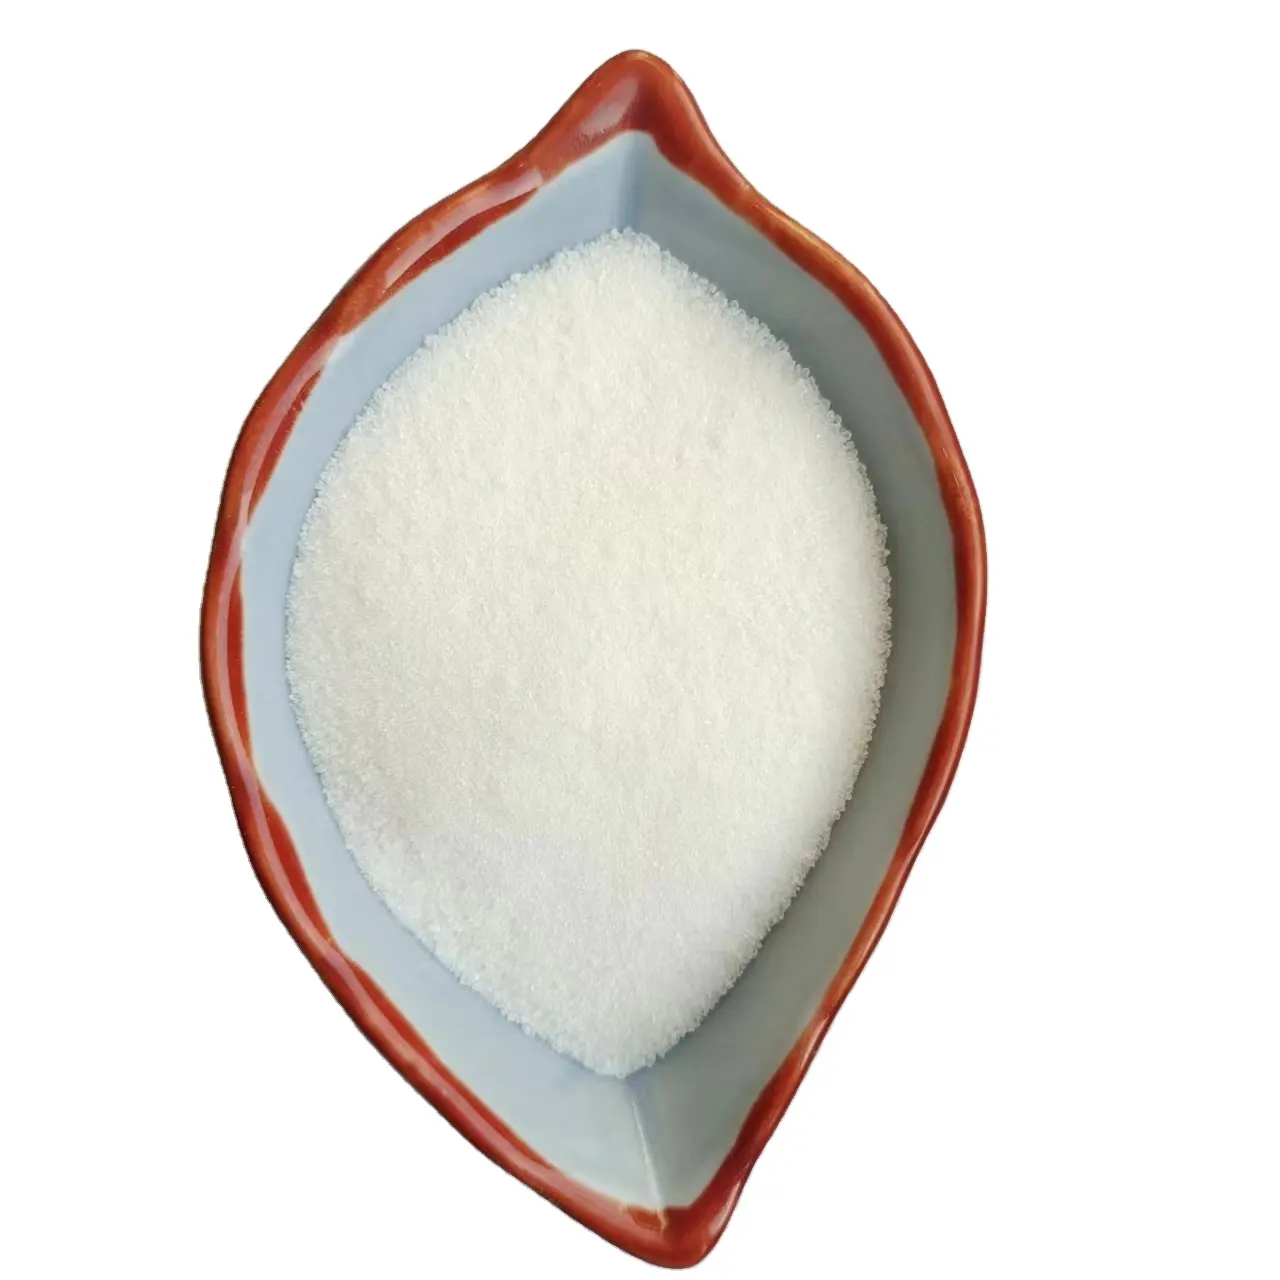 99% Solid Content White Crystalline Powder Sodium Gluconate for Industry Grade CAS 527-07-1